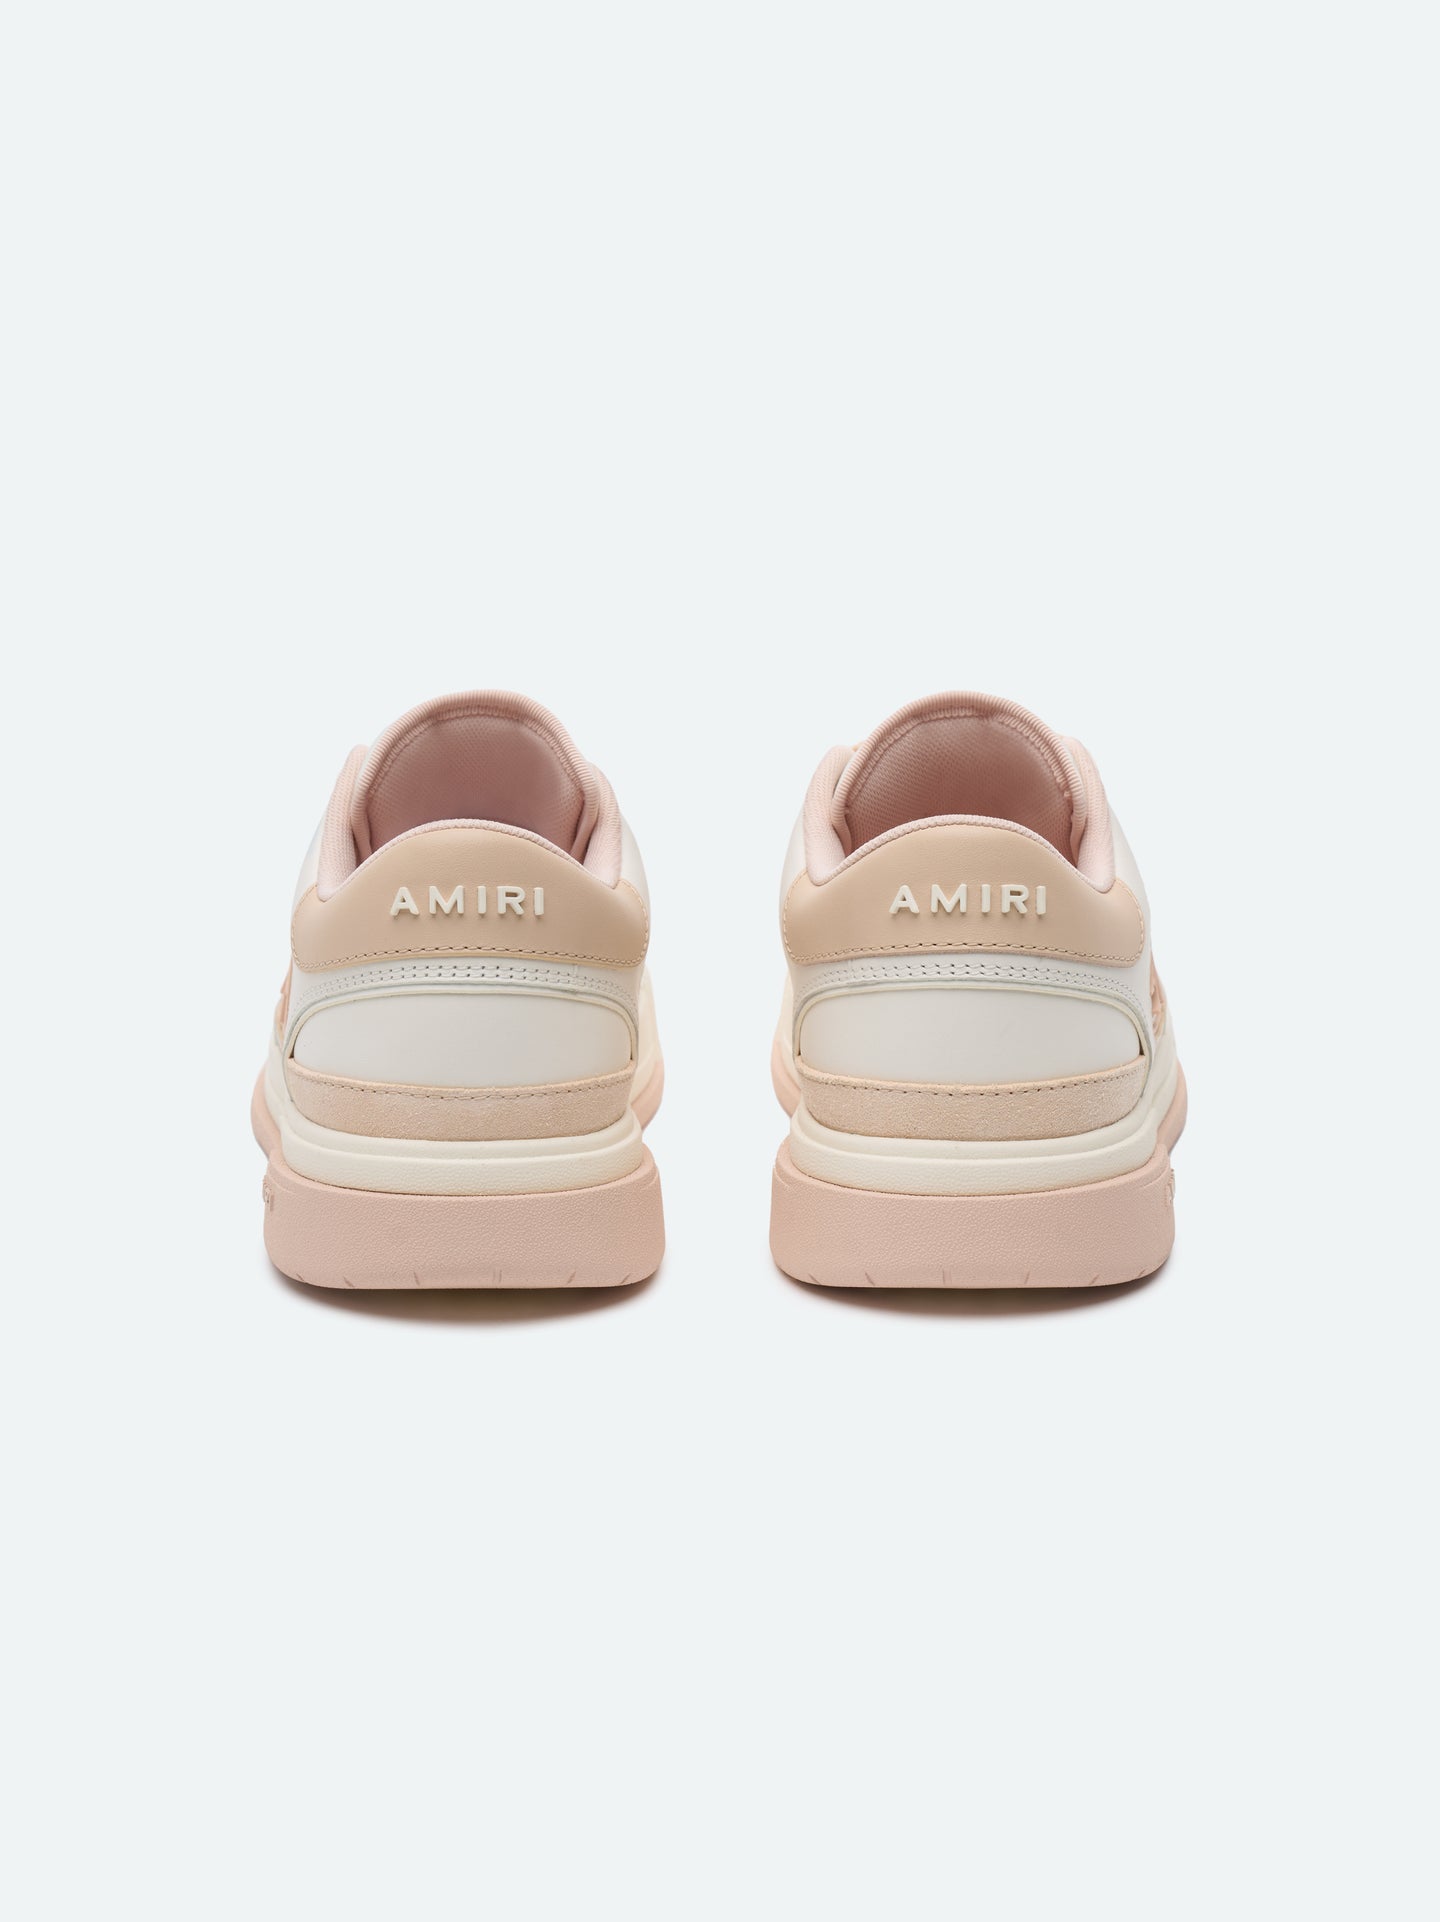 WOMEN - CLASSIC LOW - White Pink